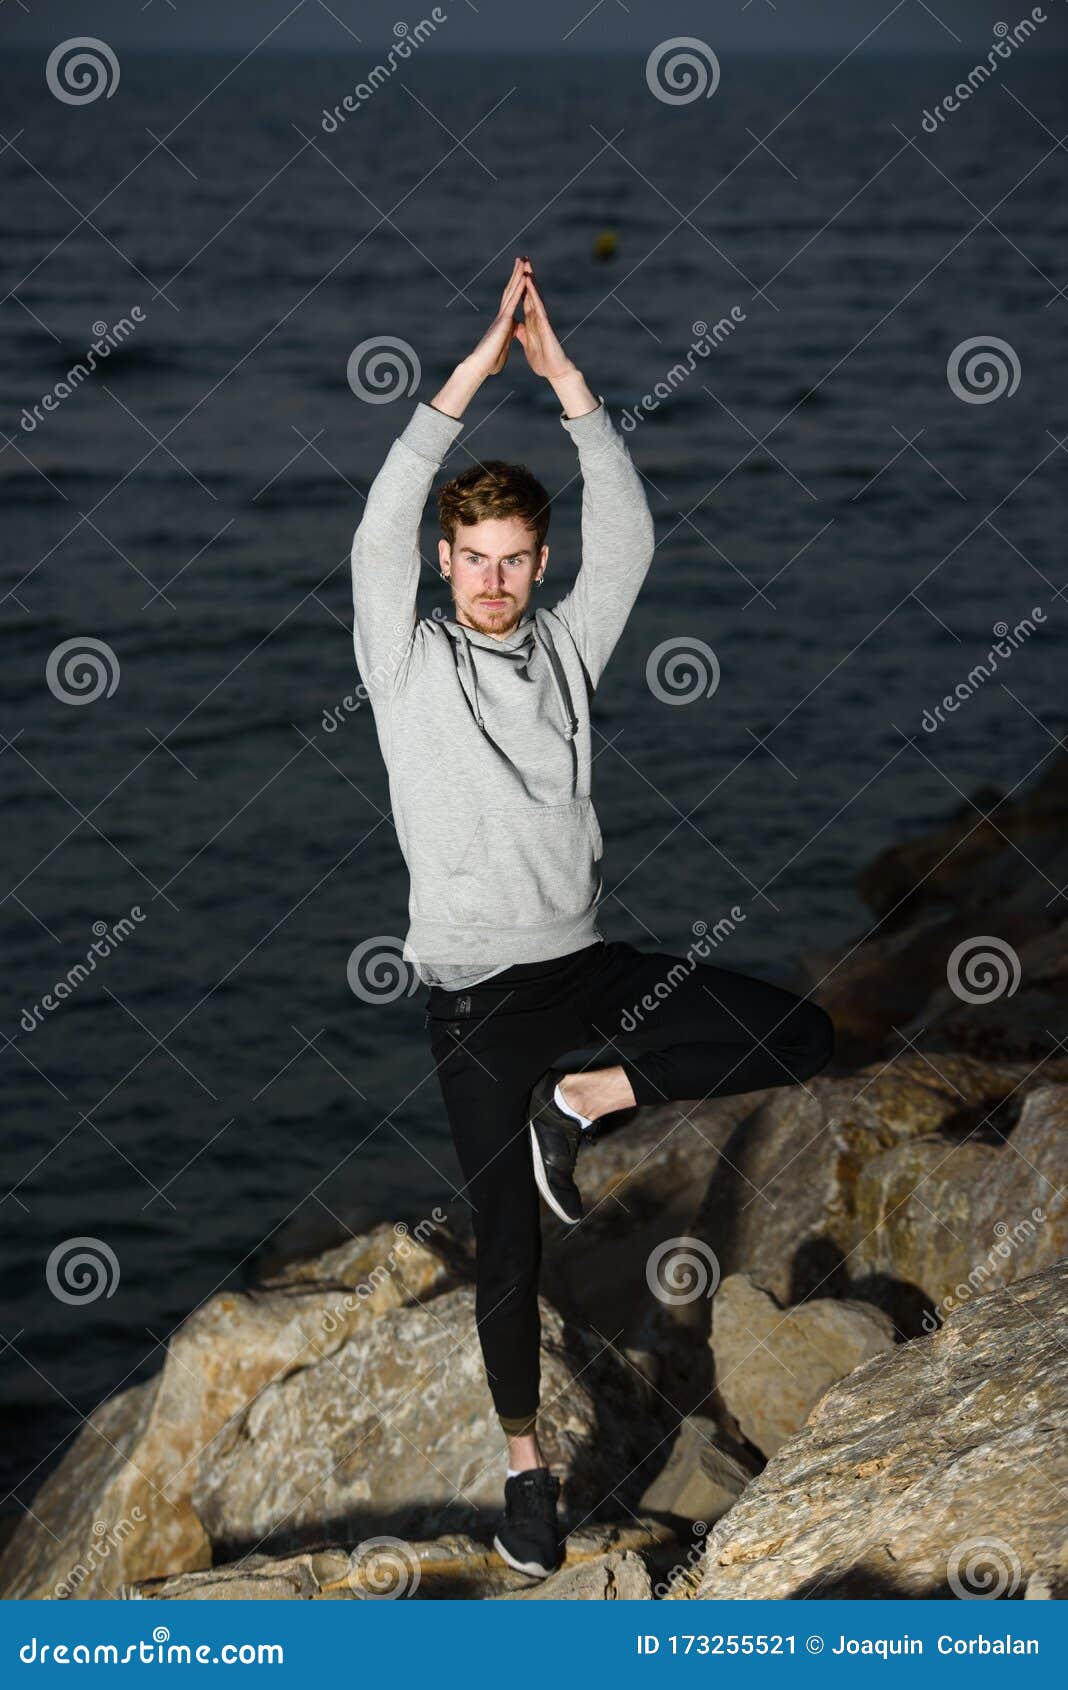 young man in a namaste greeting position while freeing his mind from worries in tree pose